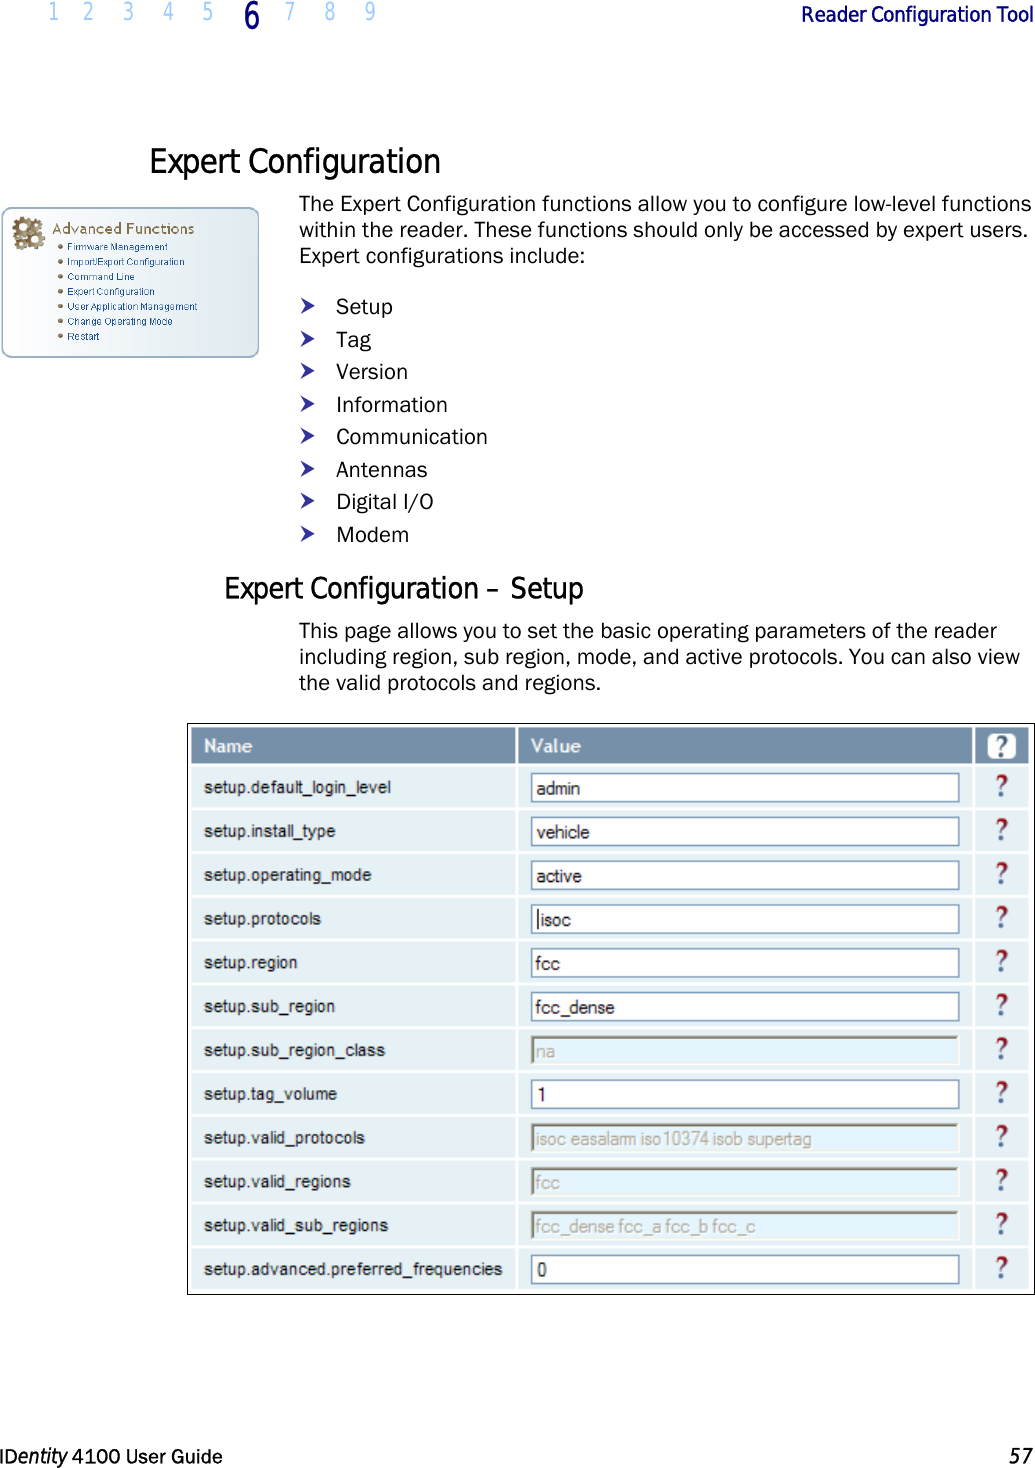  1 2 3 4 5 6 7 8 9       Reader Configuration Tool   IDentity 4100 User Guide  57  Expert Configuration The Expert Configuration functions allow you to configure low-level functions within the reader. These functions should only be accessed by expert users. Expert configurations include: h Setup h Tag h Version h Information h Communication h Antennas h Digital I/O h Modem Expert Configuration – Setup This page allows you to set the basic operating parameters of the reader including region, sub region, mode, and active protocols. You can also view the valid protocols and regions.  